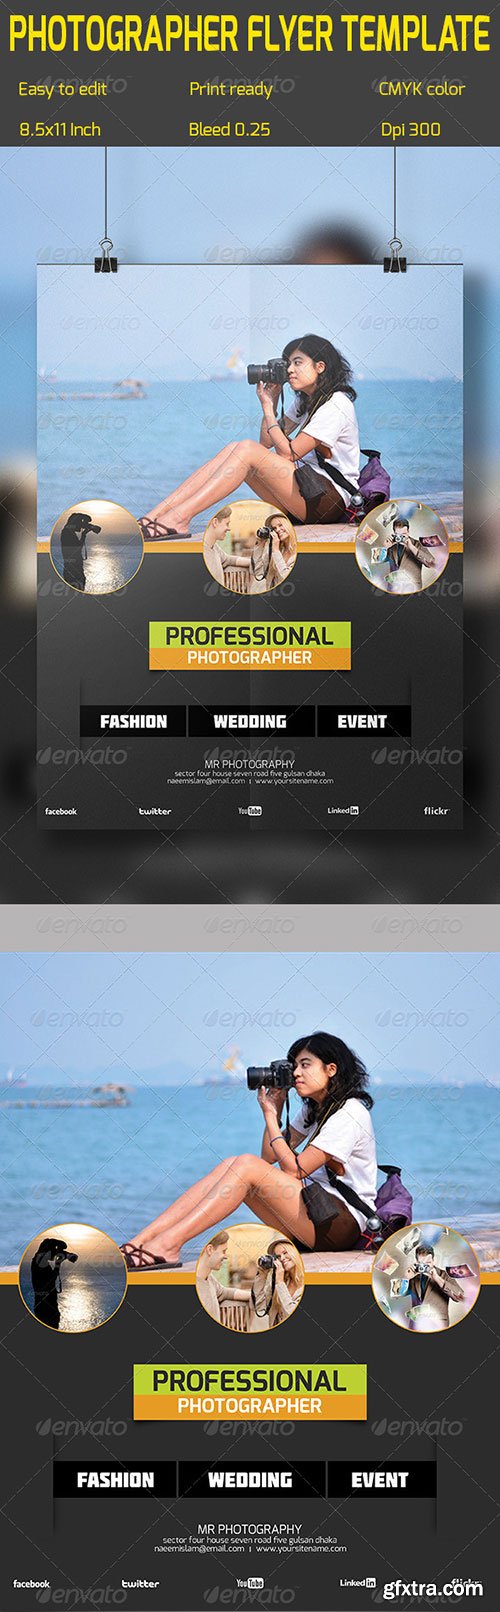 GraphicRiver - Photographer Flyer Template 6901548